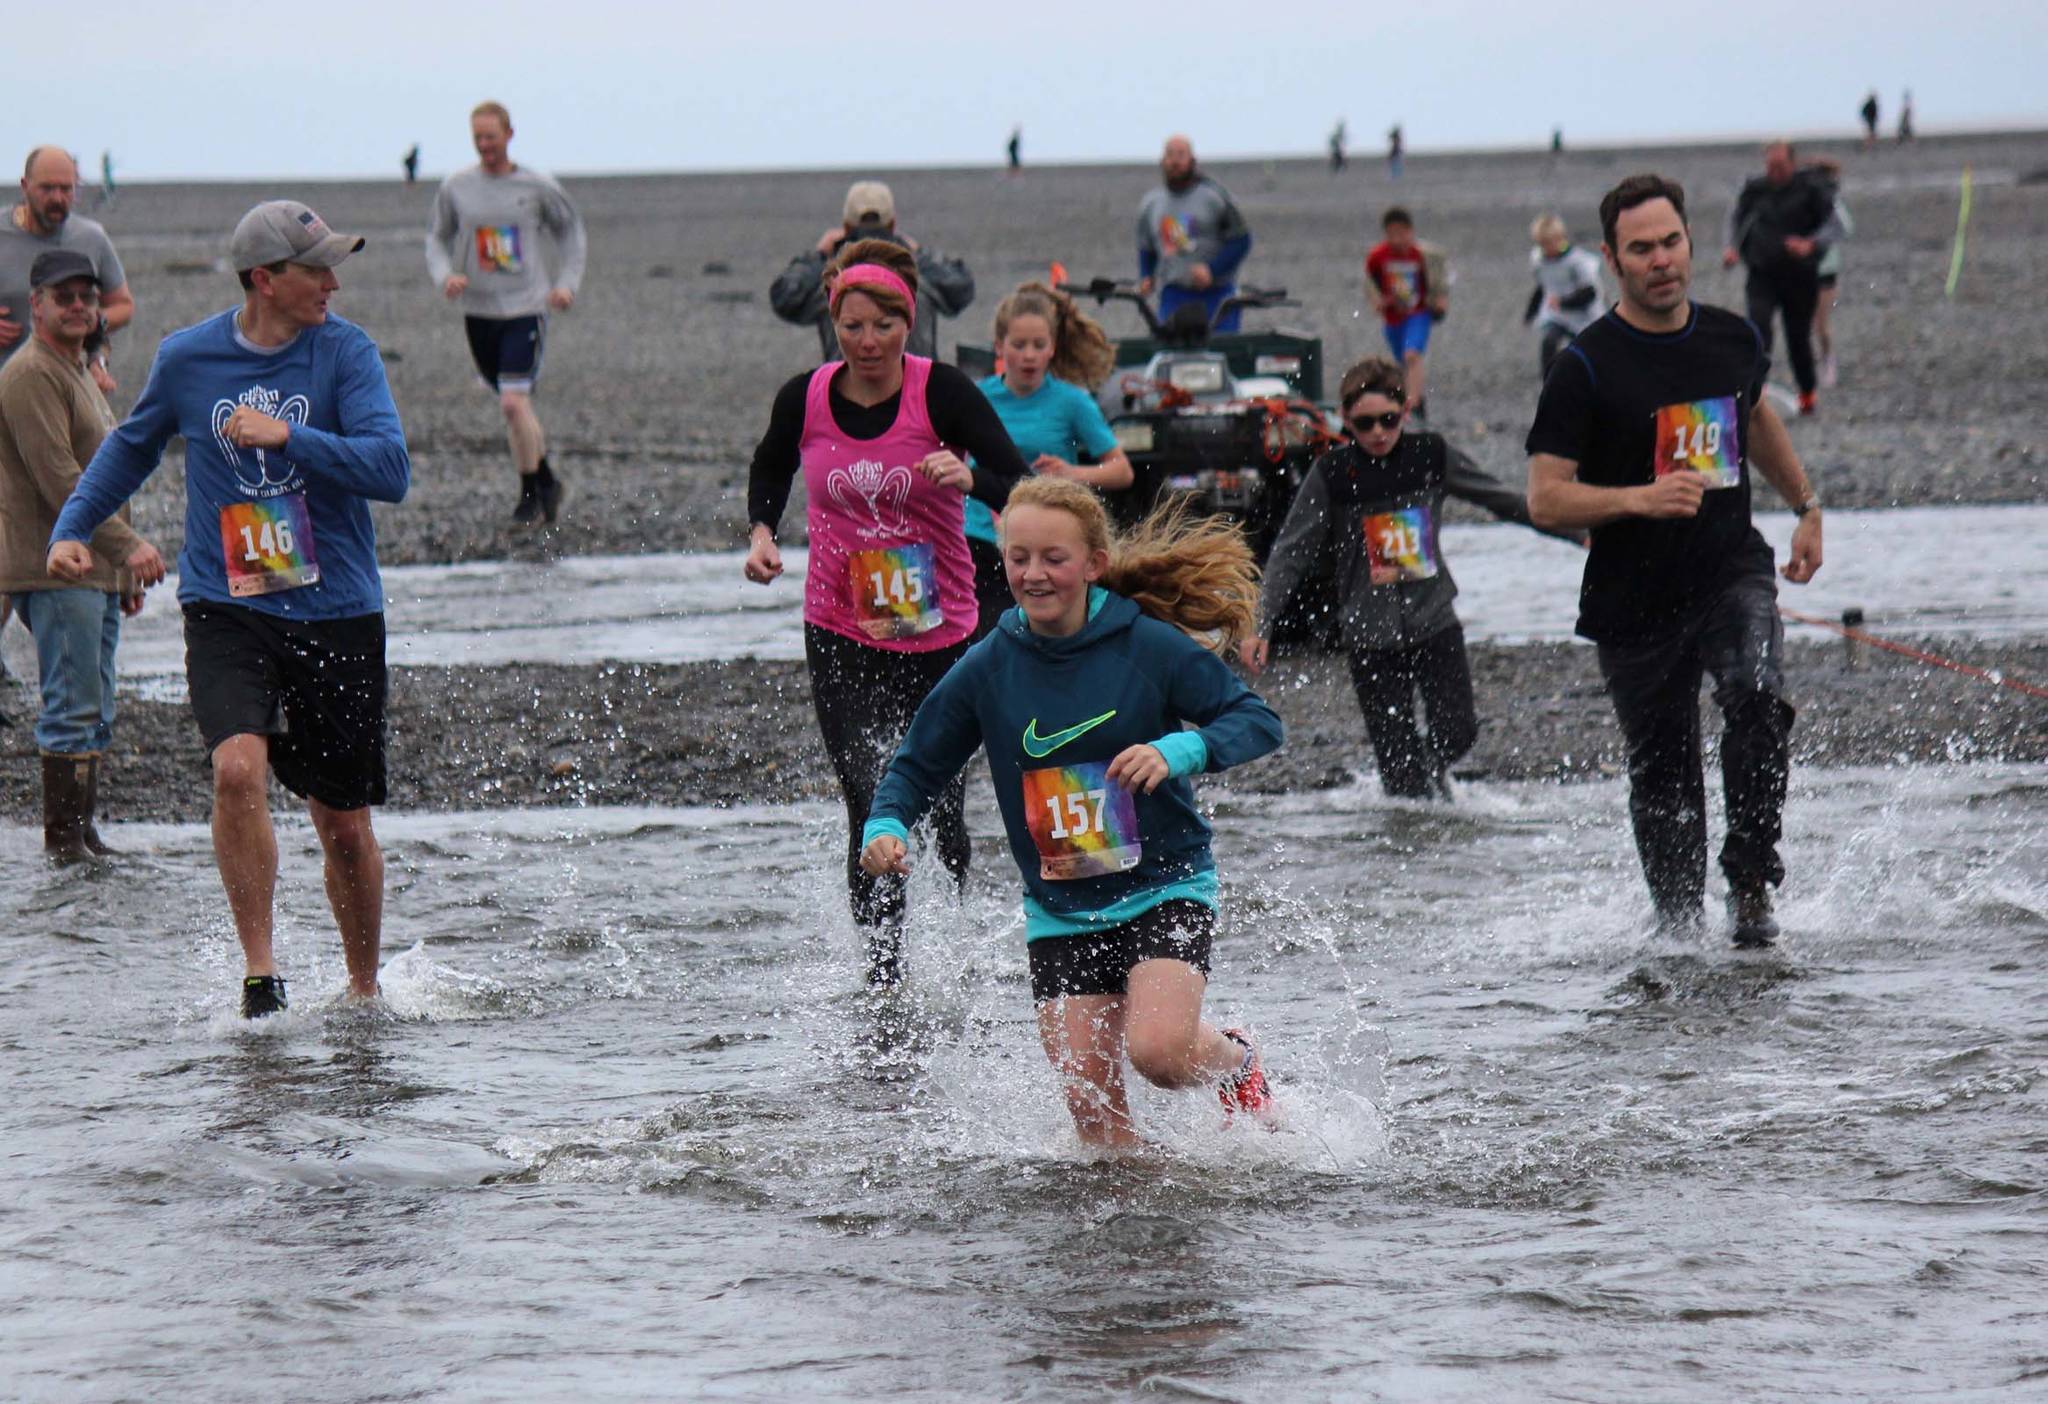 Undaunted by the rugged course, athletes young and old participate in the 2019 Clam Scramble, a 5K fun run held Saturday, June 15, 2019 in Ninilchik, Alaska. Kylee Verkulien, 157, leads this group of runners through the cold and fast-moving water at the mouth of Deep Creek. (Photo by McKibben Jackinsky)